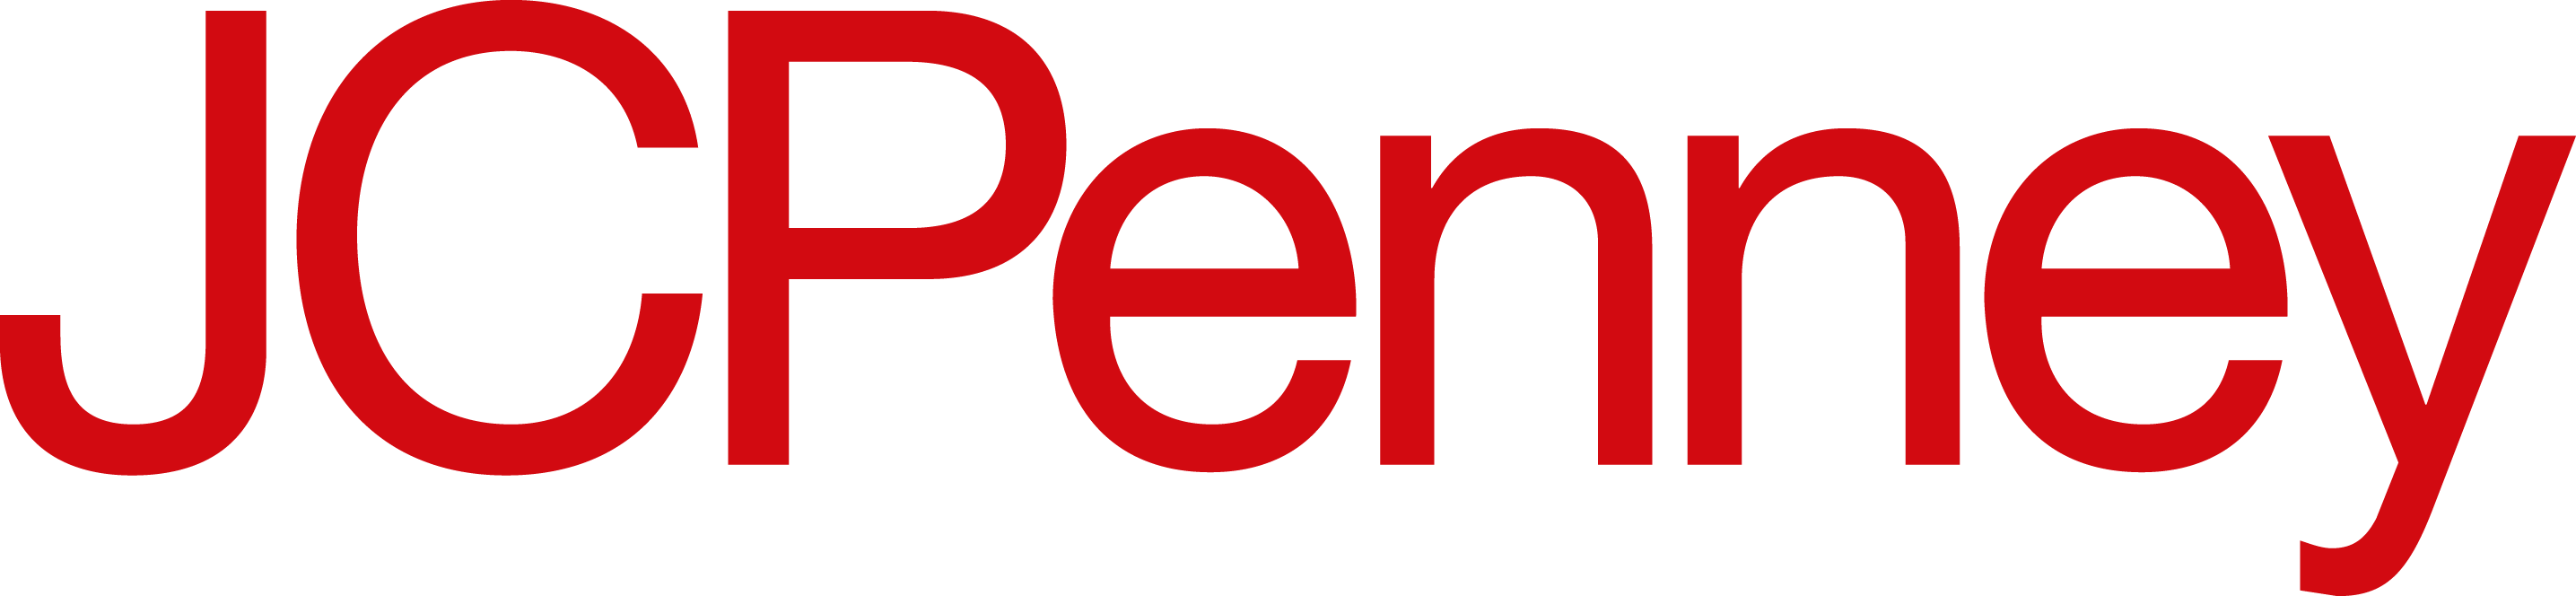 Jcpenney Logo png